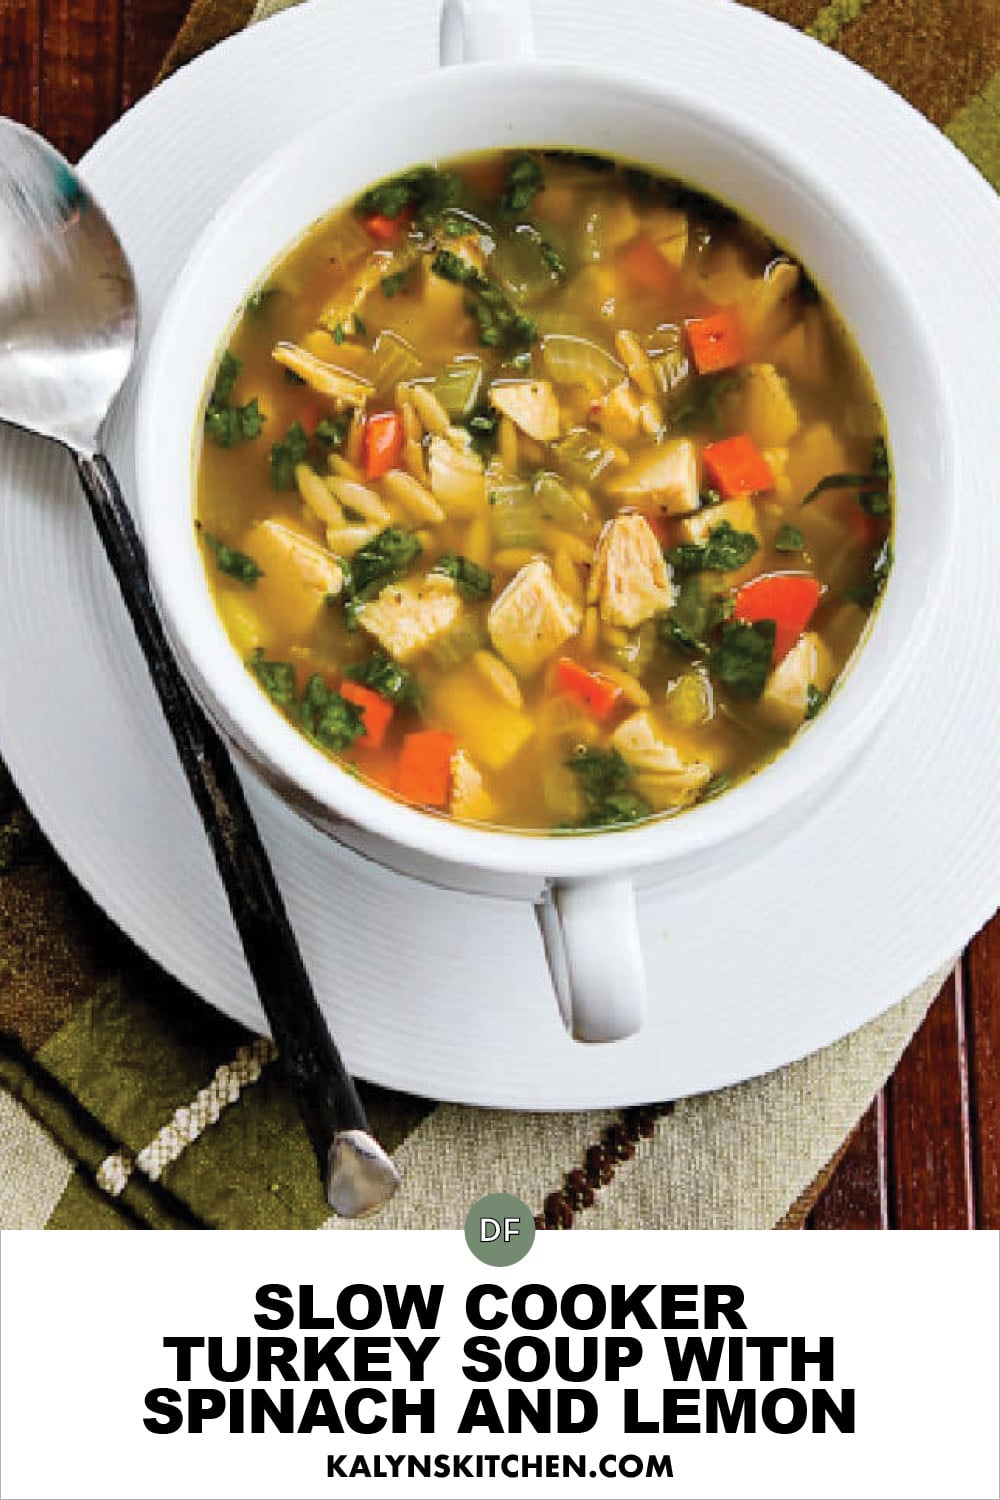 Pinterest image of Slow Cooker Turkey Soup with Spinach and Lemon